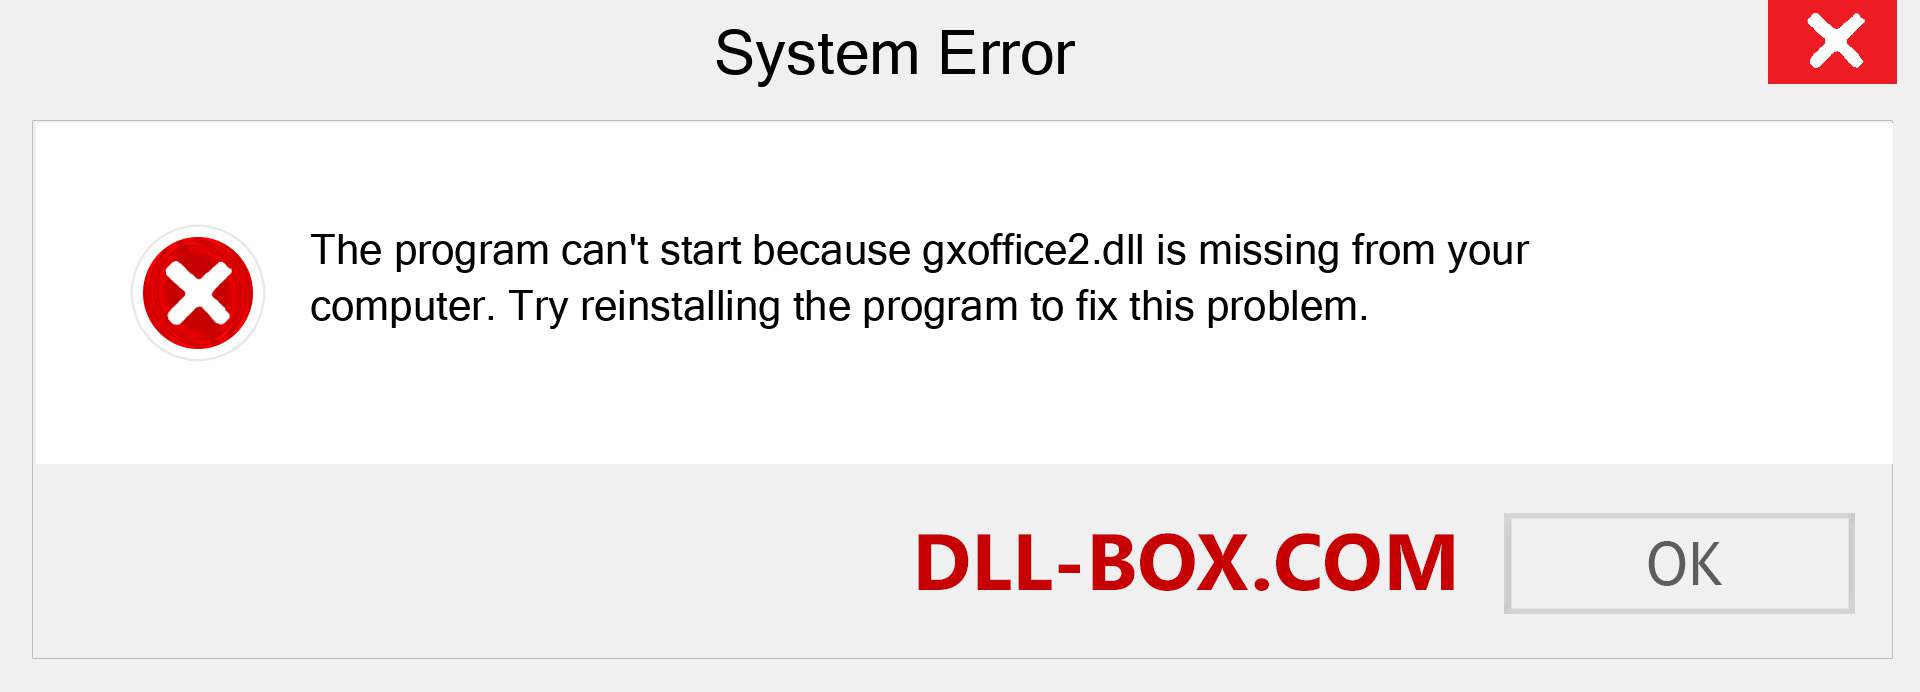  gxoffice2.dll file is missing?. Download for Windows 7, 8, 10 - Fix  gxoffice2 dll Missing Error on Windows, photos, images